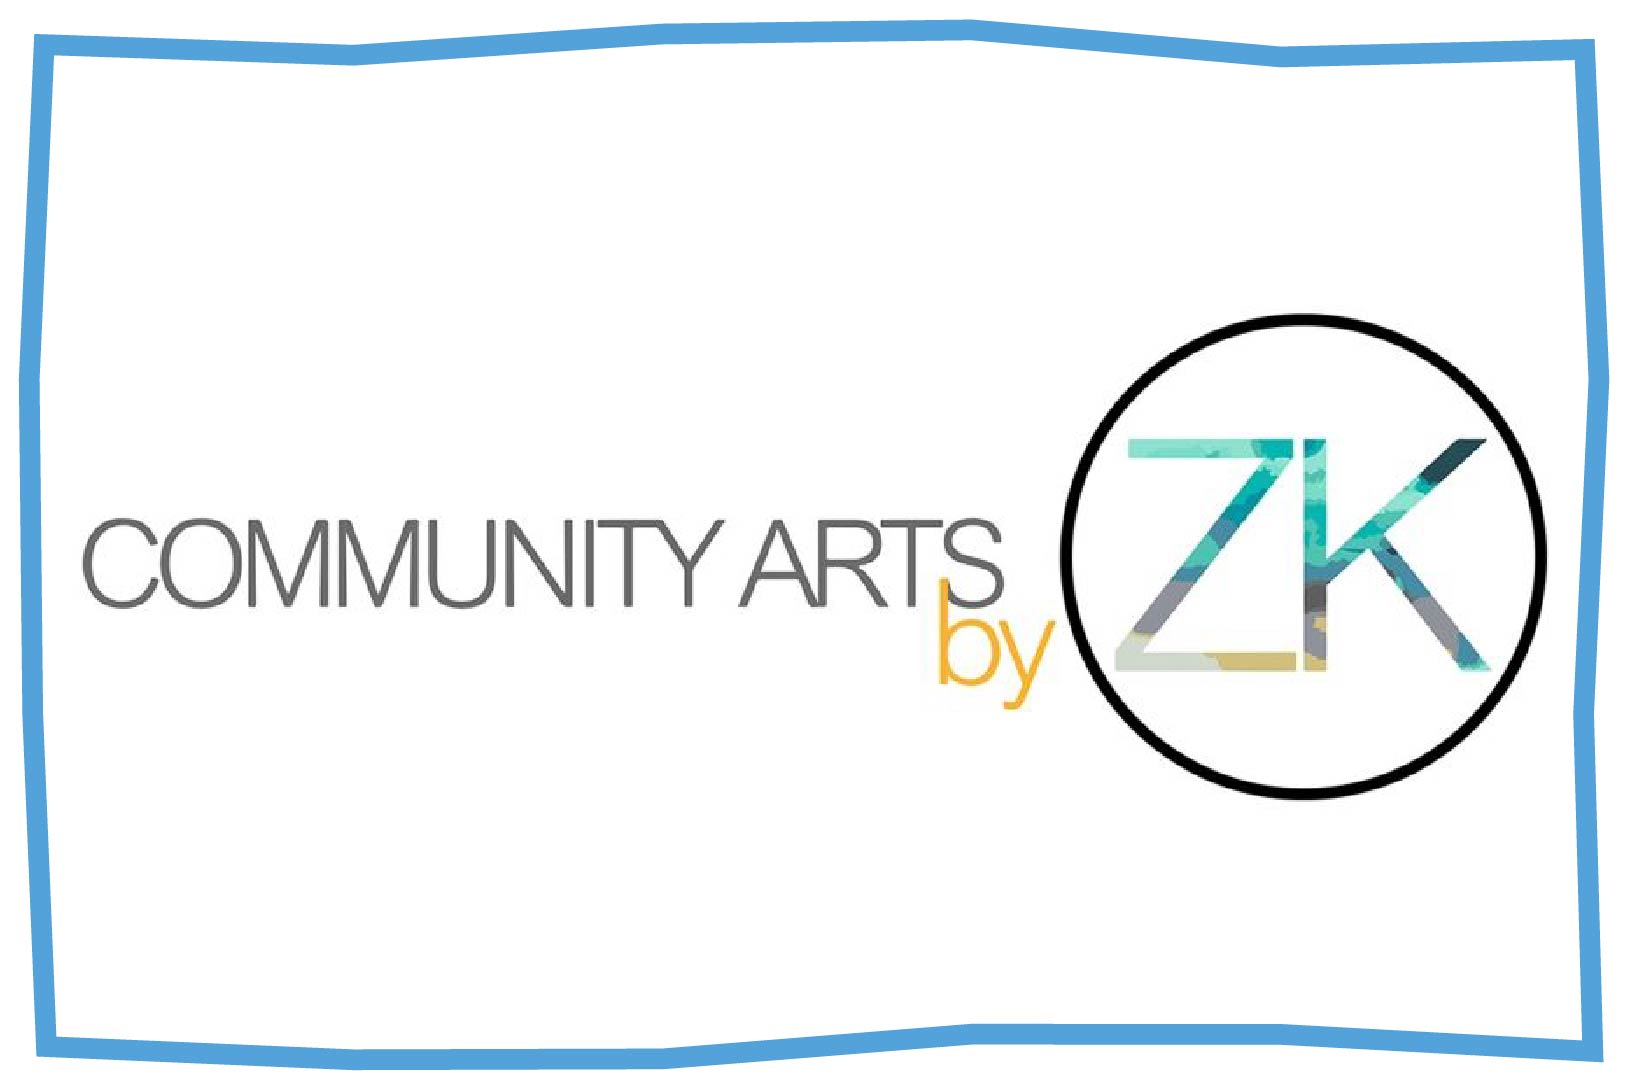 Community Arts by ZK: Buzzing Bees